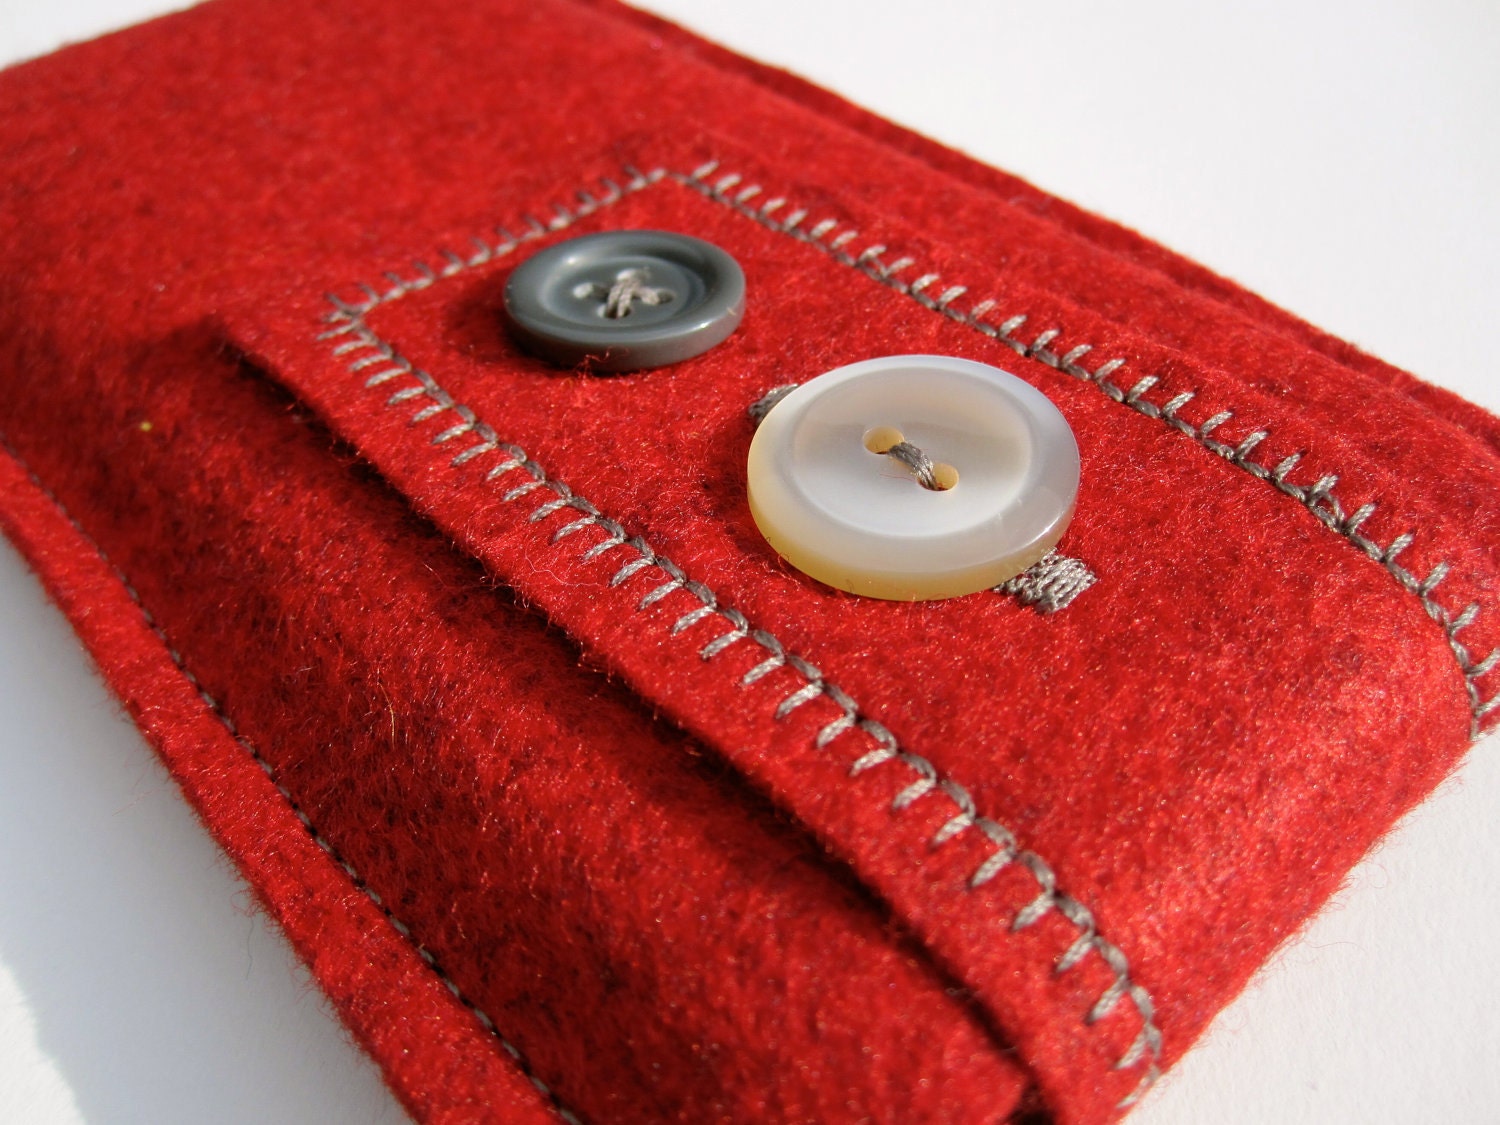 Bold & Modern Red Wool Felt iPhone / iPod Touch Cozy with Earphone or USB Cable Back Pocket - Double Buttoned